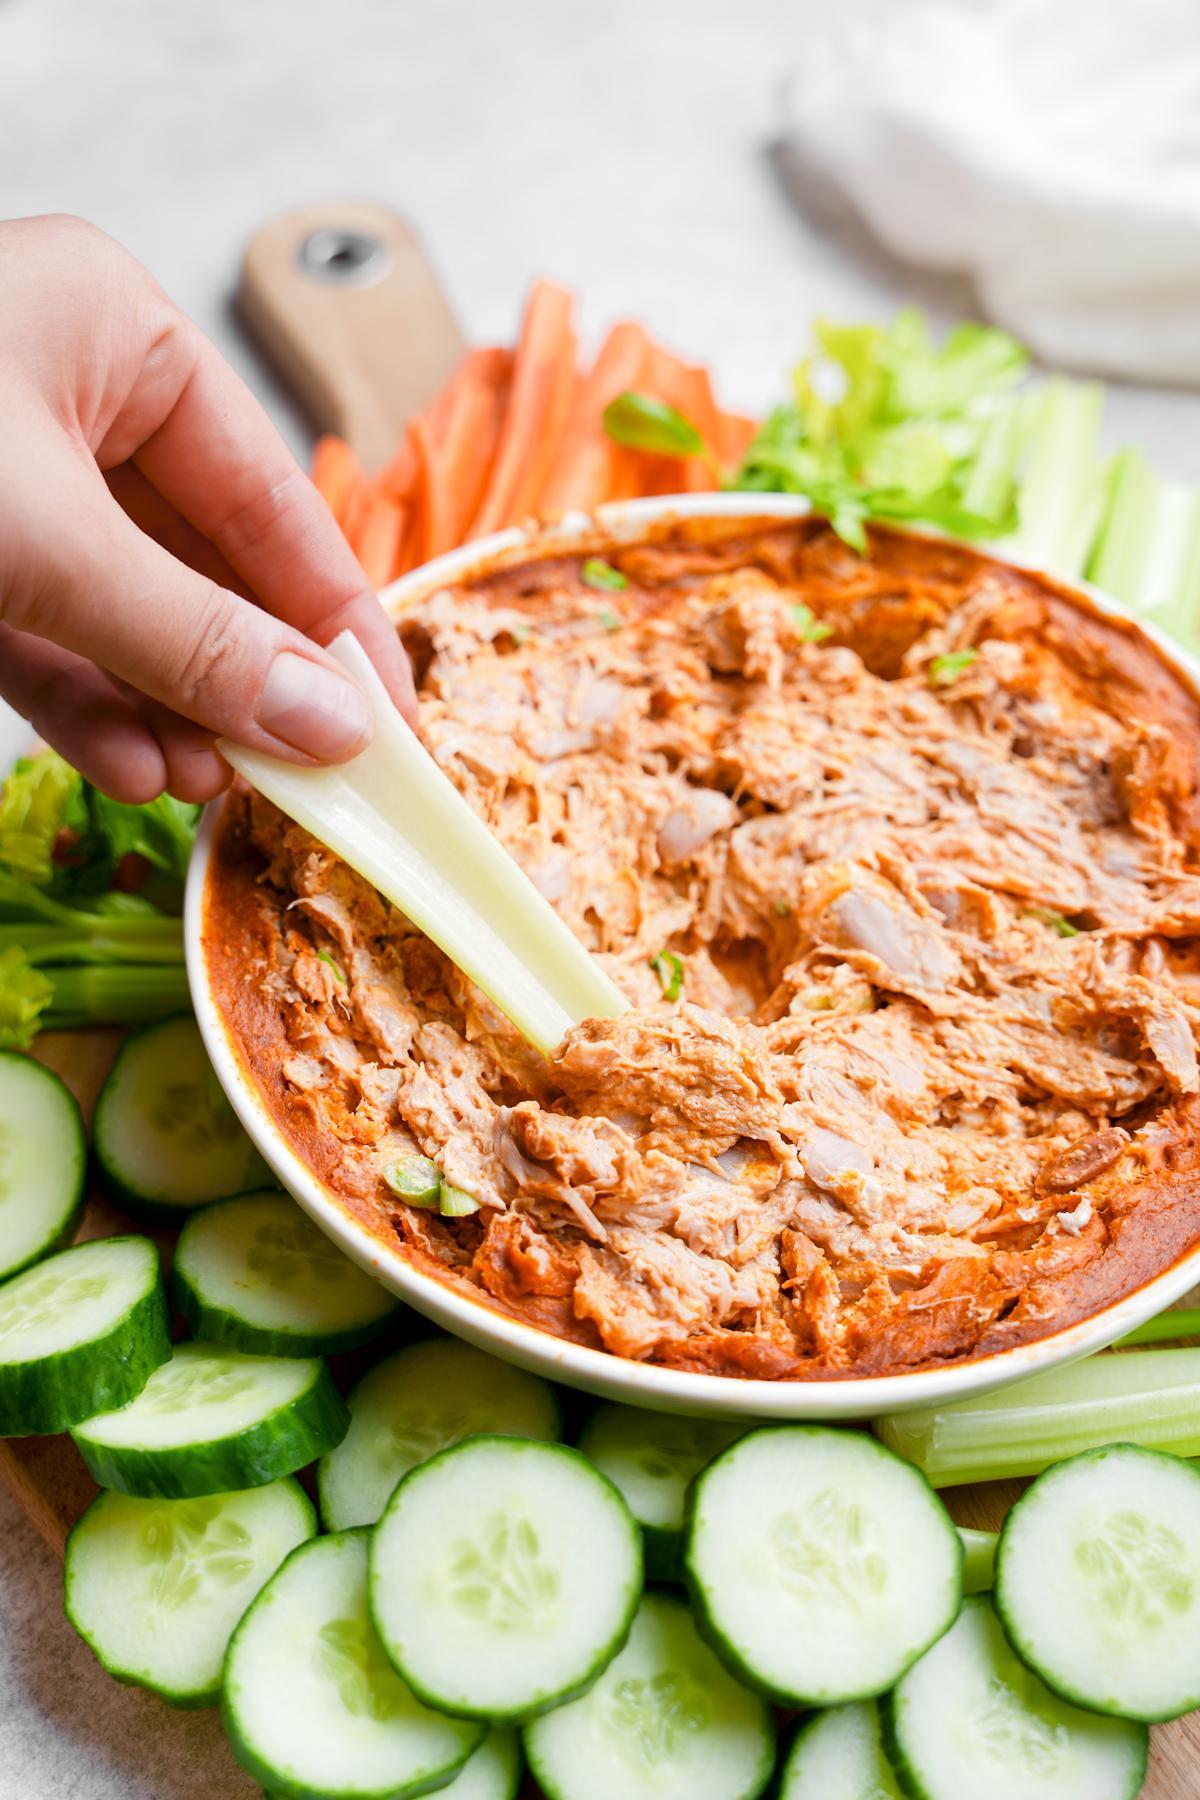 the vegan buffalo chicken dip with a hand dipping celery into it